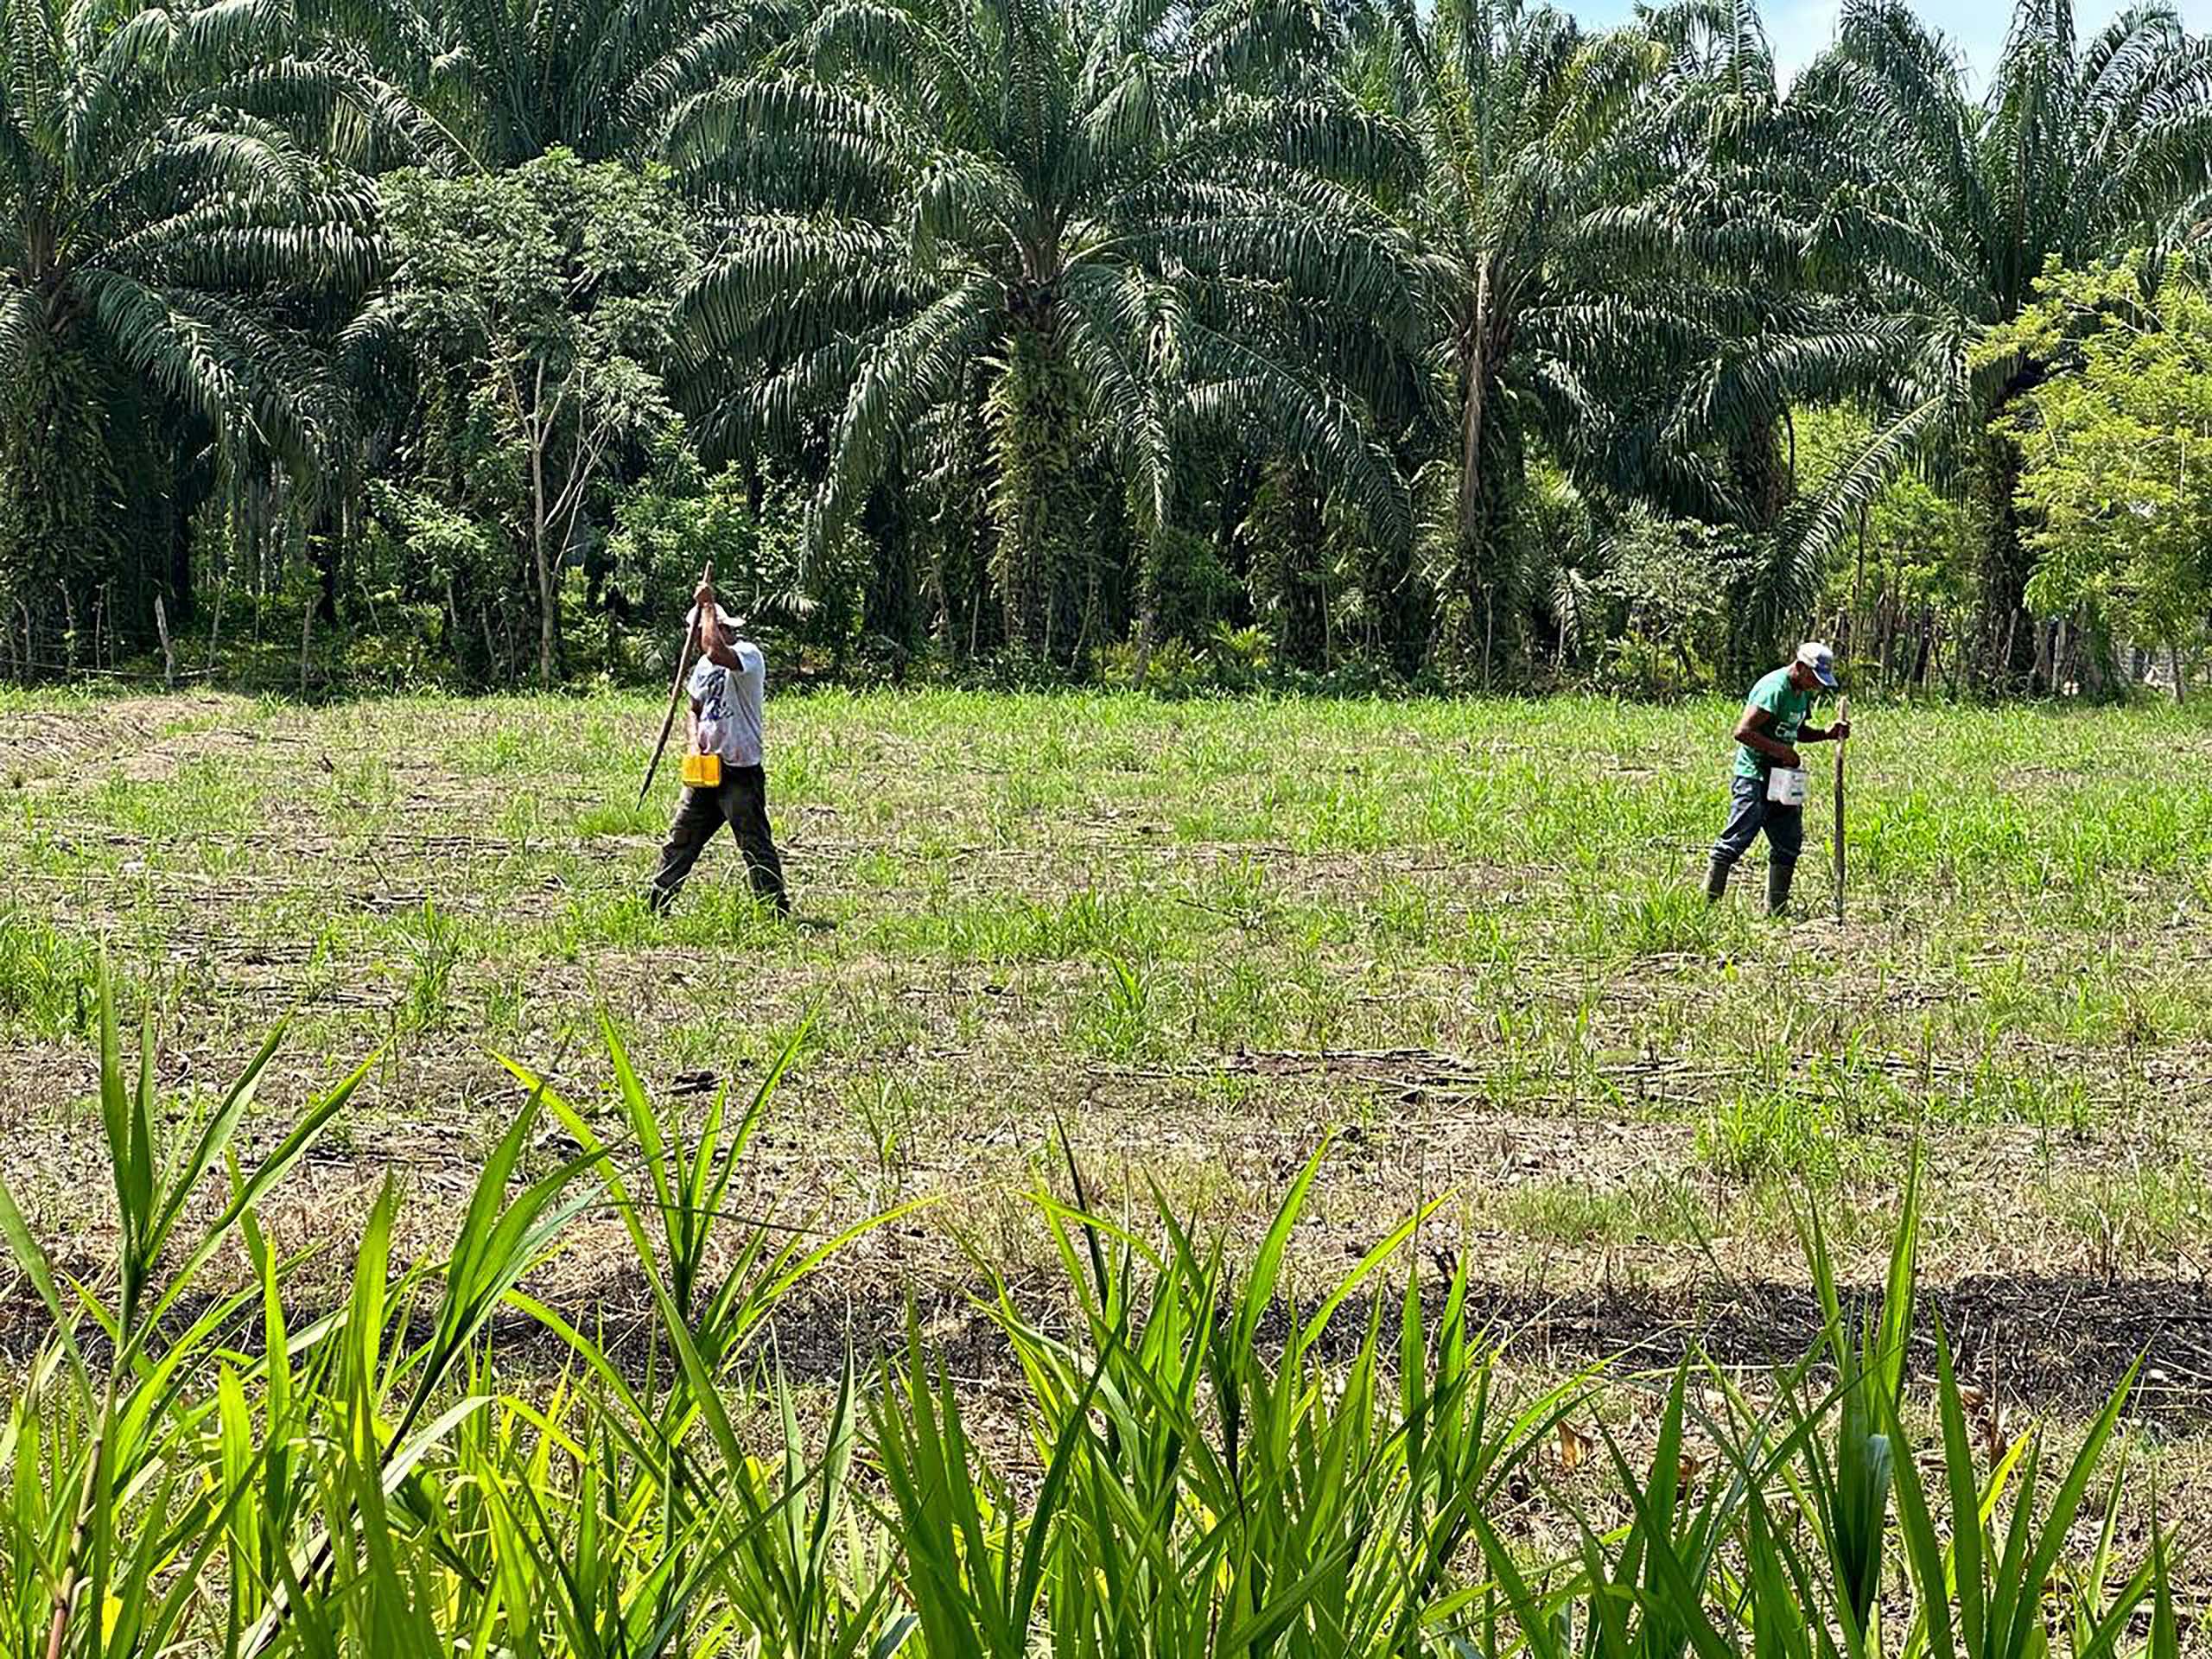 Two people work in a field, oil palm trees behind